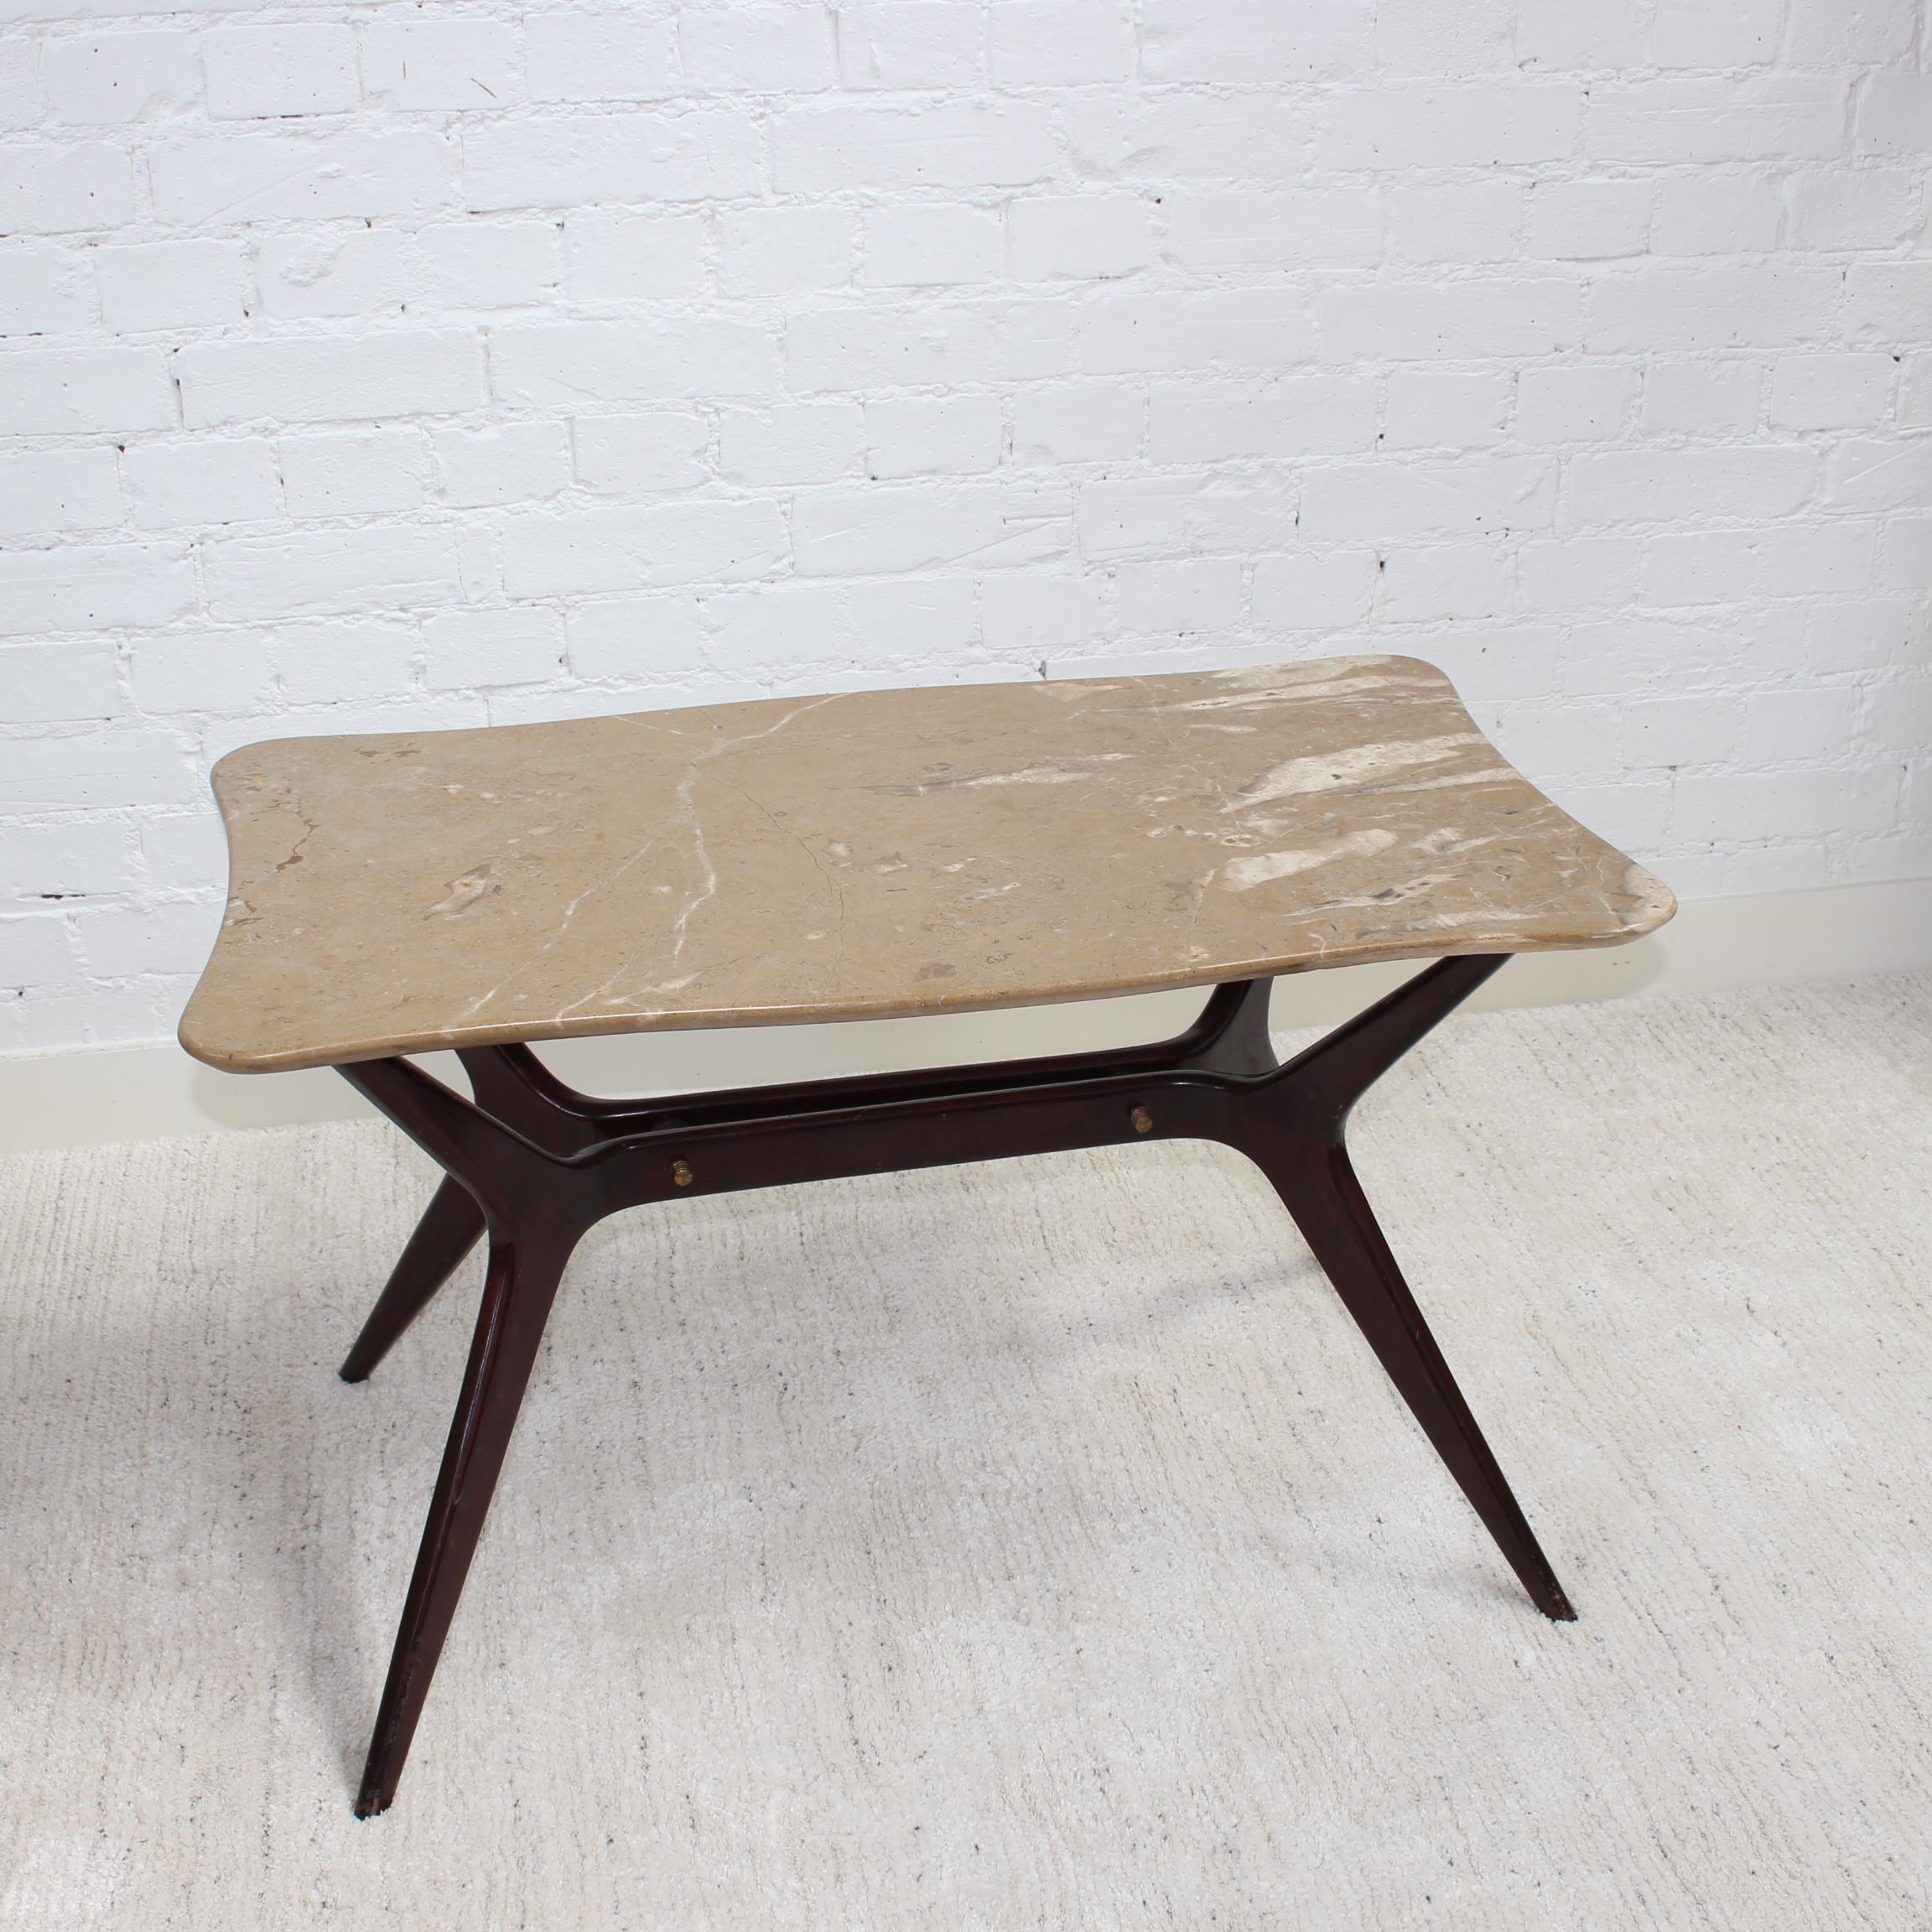 Mid-century Italian coffee table with marble top in the style of Ico Parisi (1950s). A tan with white highlights, rectangular (with curved ends) marble top sits upon a very stylish base consisting of Ico Parisi style wooden legs. The legs have a